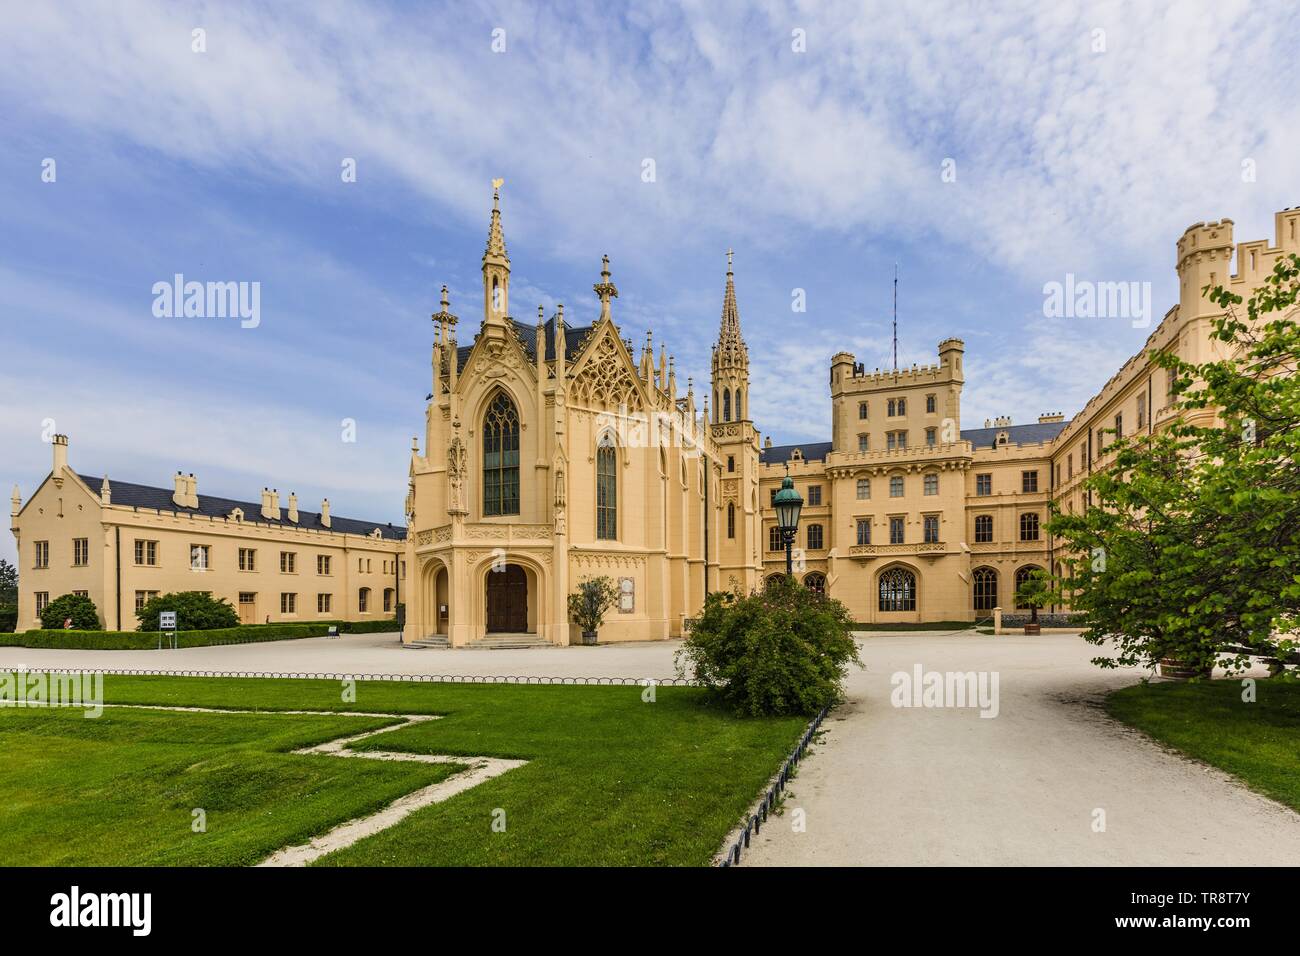 Lednice, Czech Republic - May 27 2019: Famous Lednice castle in South Moravia with yellow facade. Green lawn, trees and sand footpath in foreground. Stock Photo